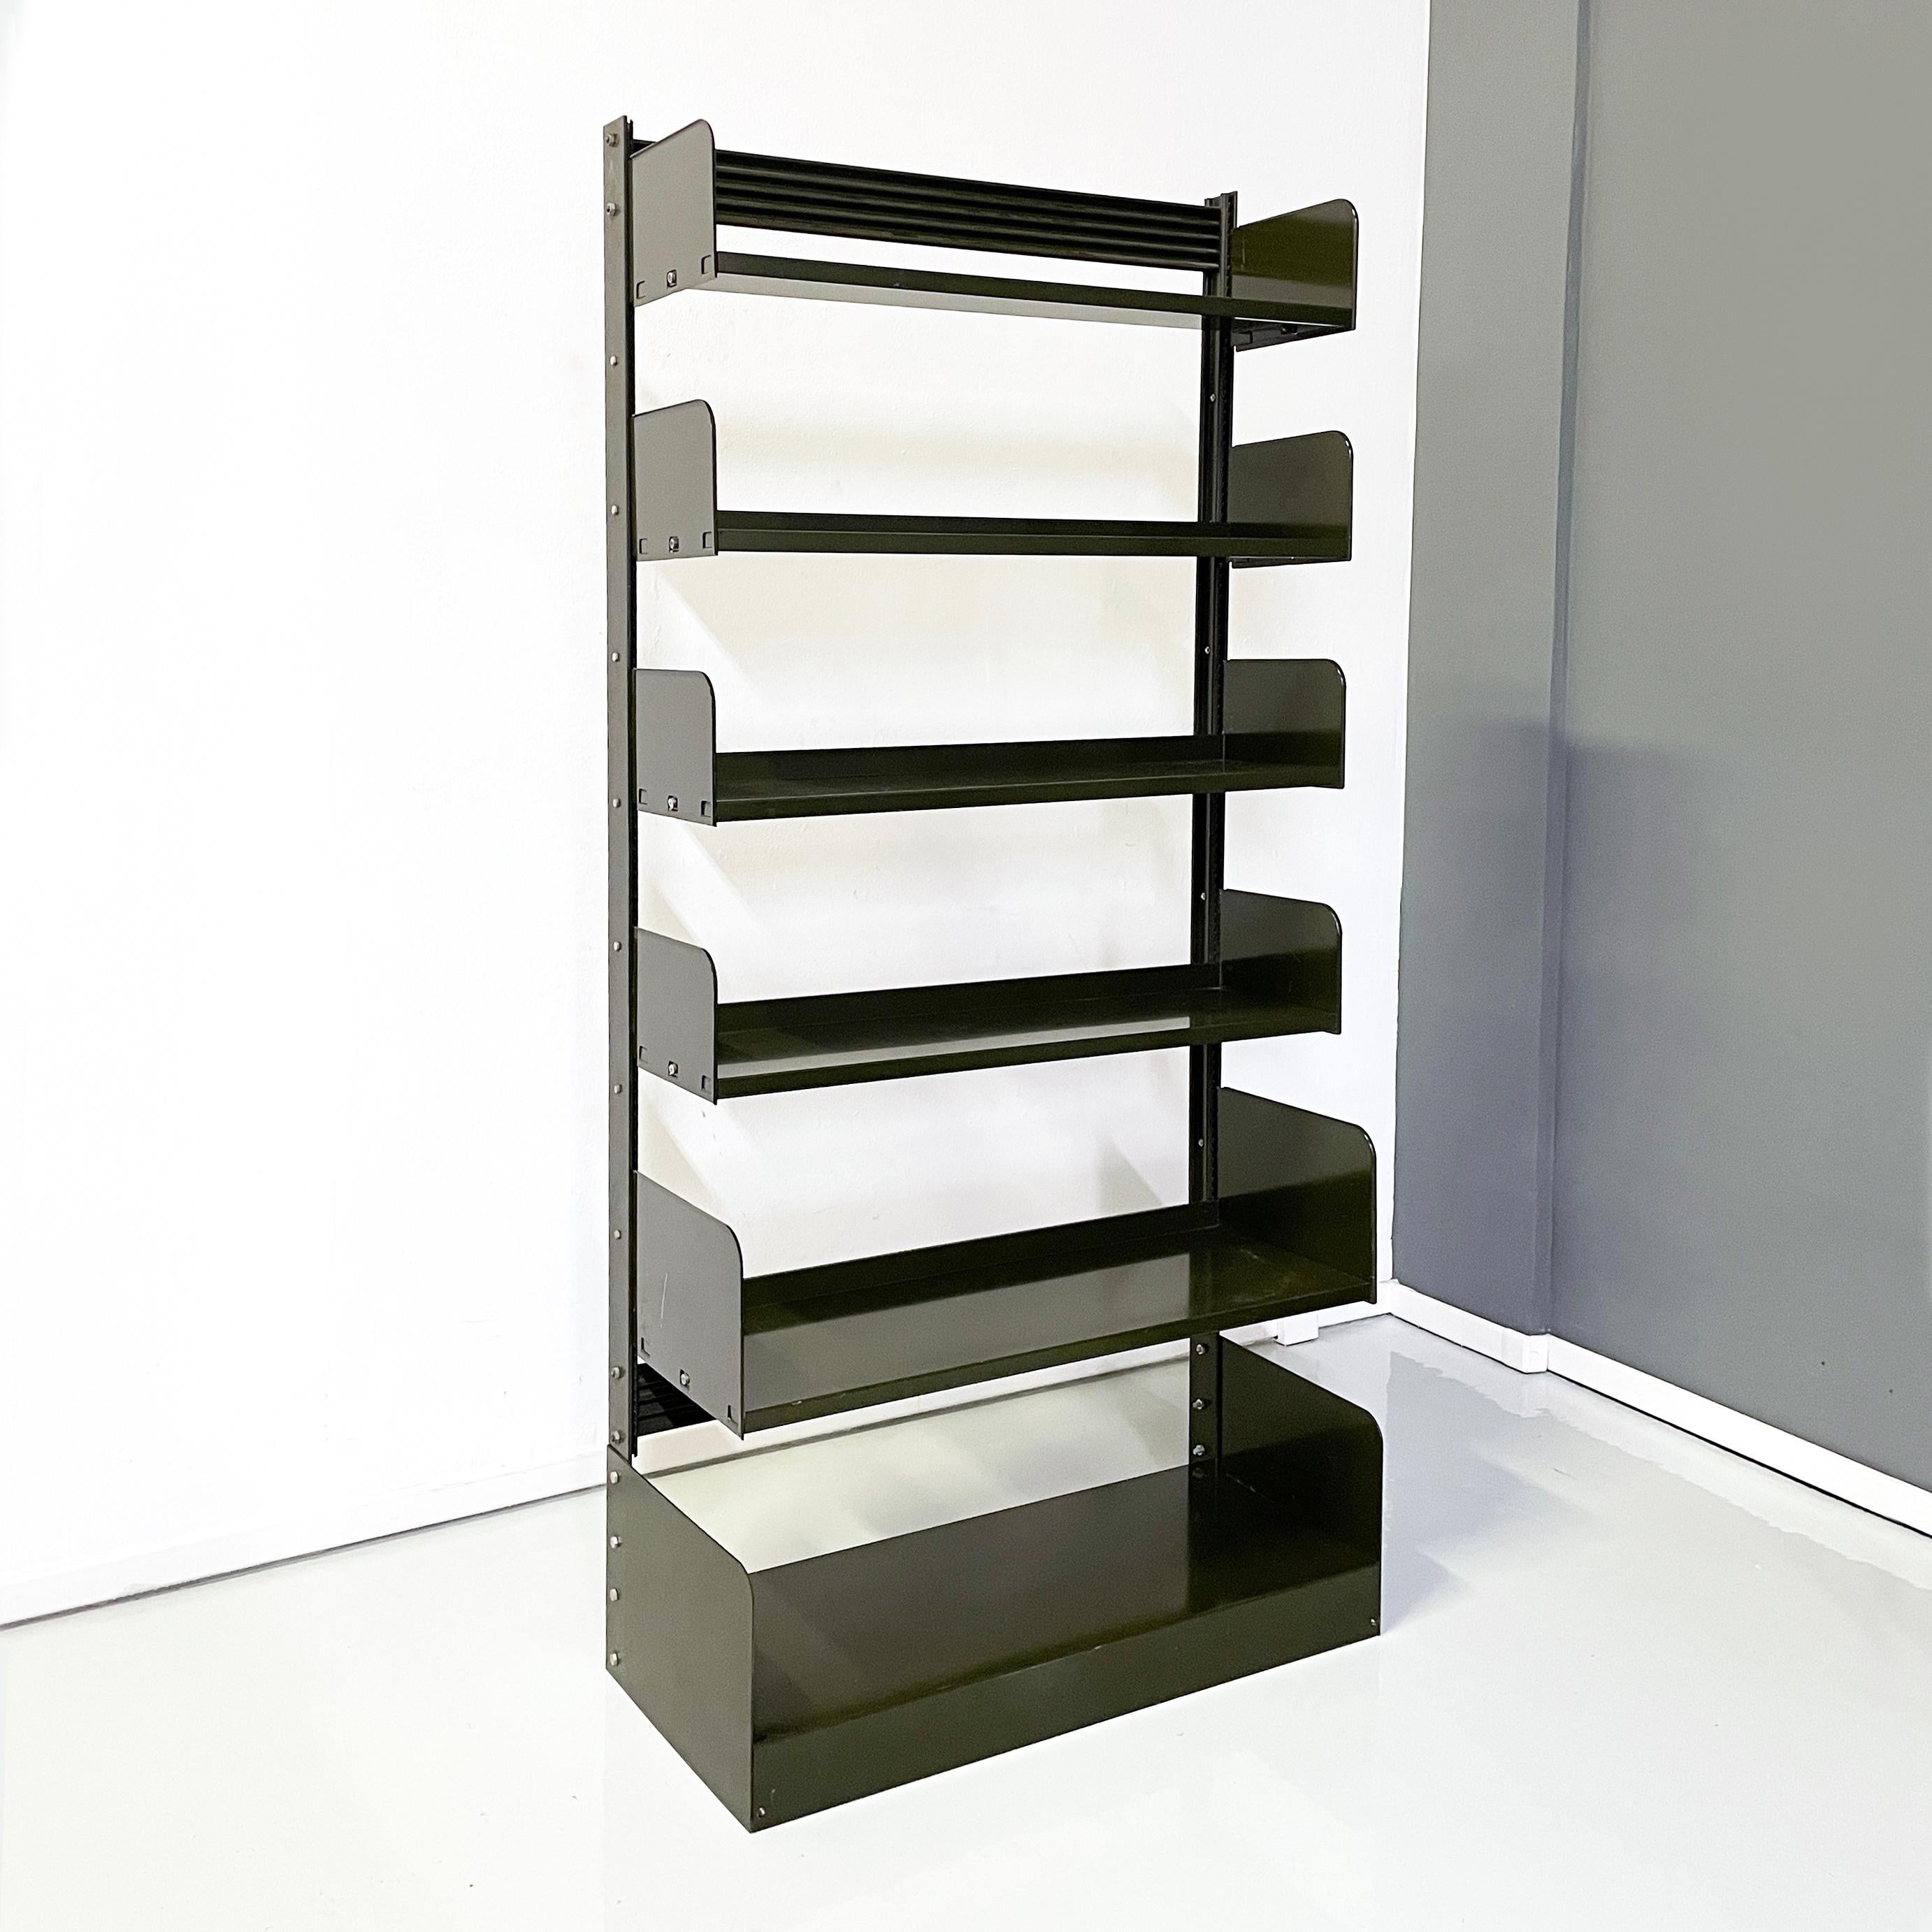 Italian mid-century modern green Modular bookcase Congresso  by Lips Vago, 1960s
Modular bookcase mod. Congresso with structure entirely in dark green metal, original of the time. The structure is made up of 3 modules, which can be used together or